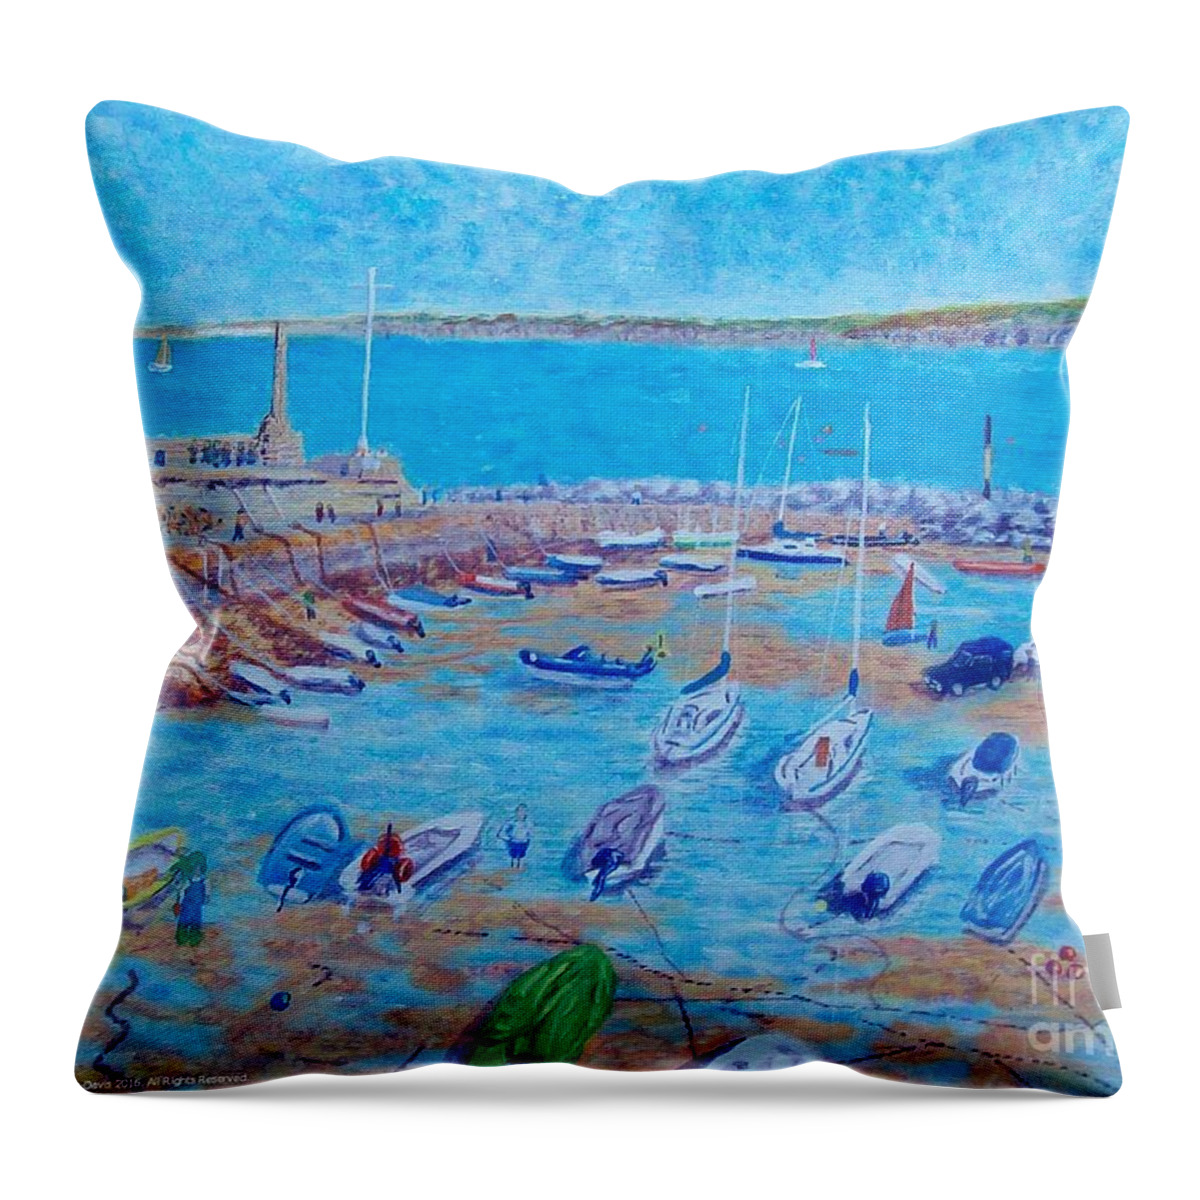 Painting New Quay Harbour Blue Boats Ceredigion Throw Pillow featuring the painting New Quay Harbour Blue Boats Ceredigion by Edward McNaught-Davis